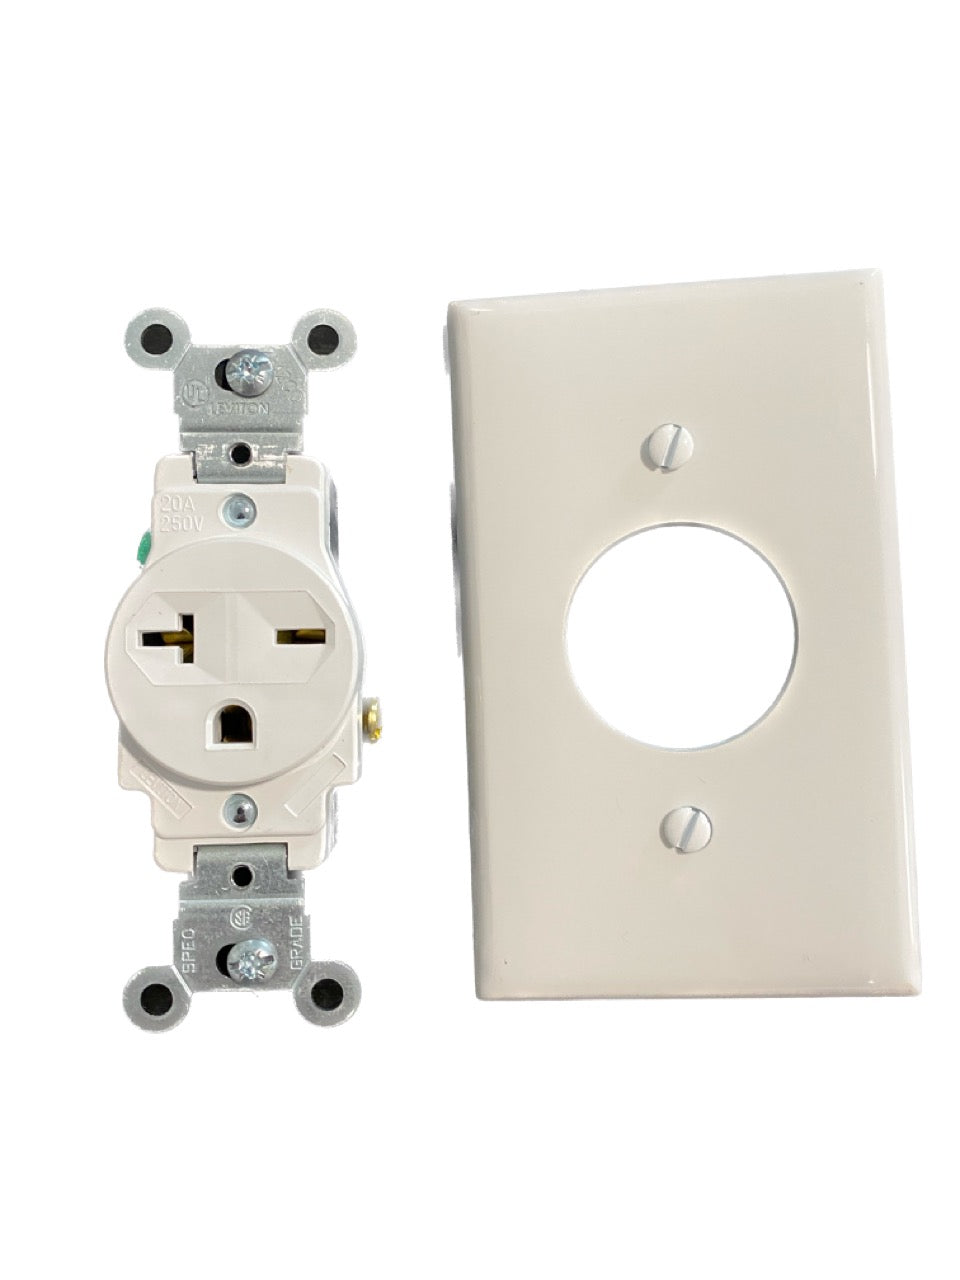 Cinderella® 6-20R Outlet and Cover